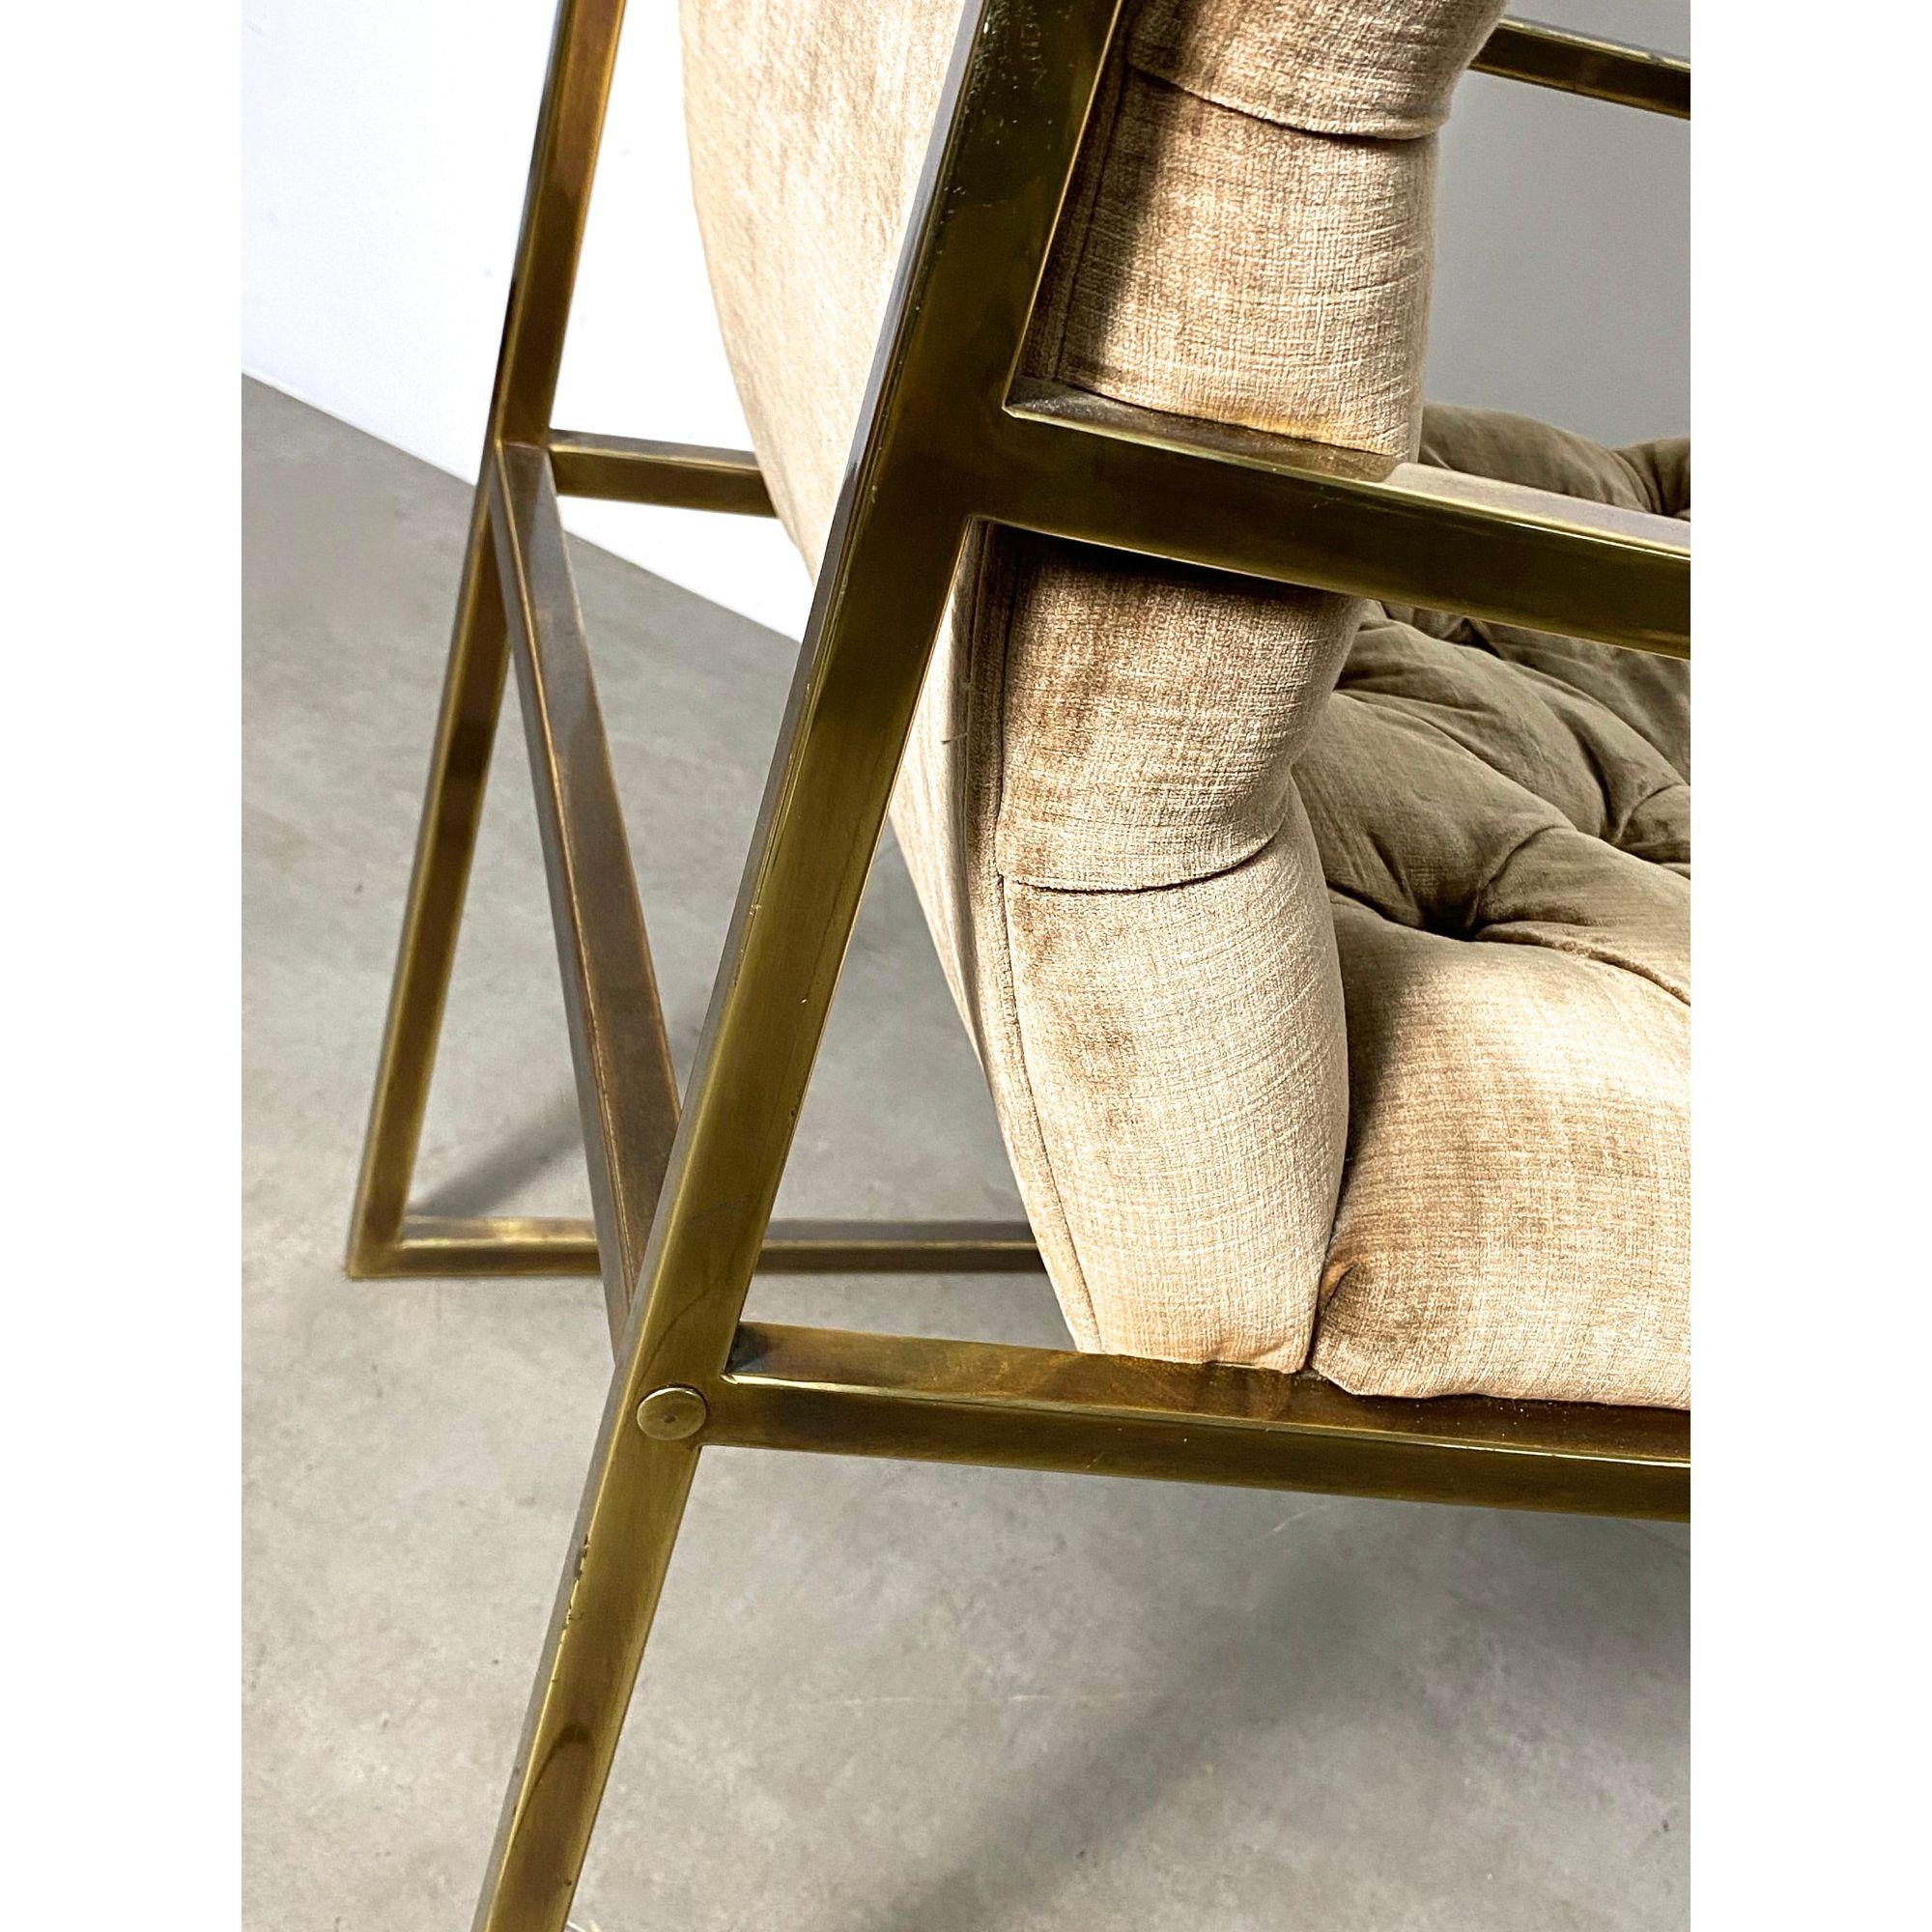 Mastercraft Acid Etched Armchair in Brass by Bernhard Rohne, circa 1970's For Sale 4